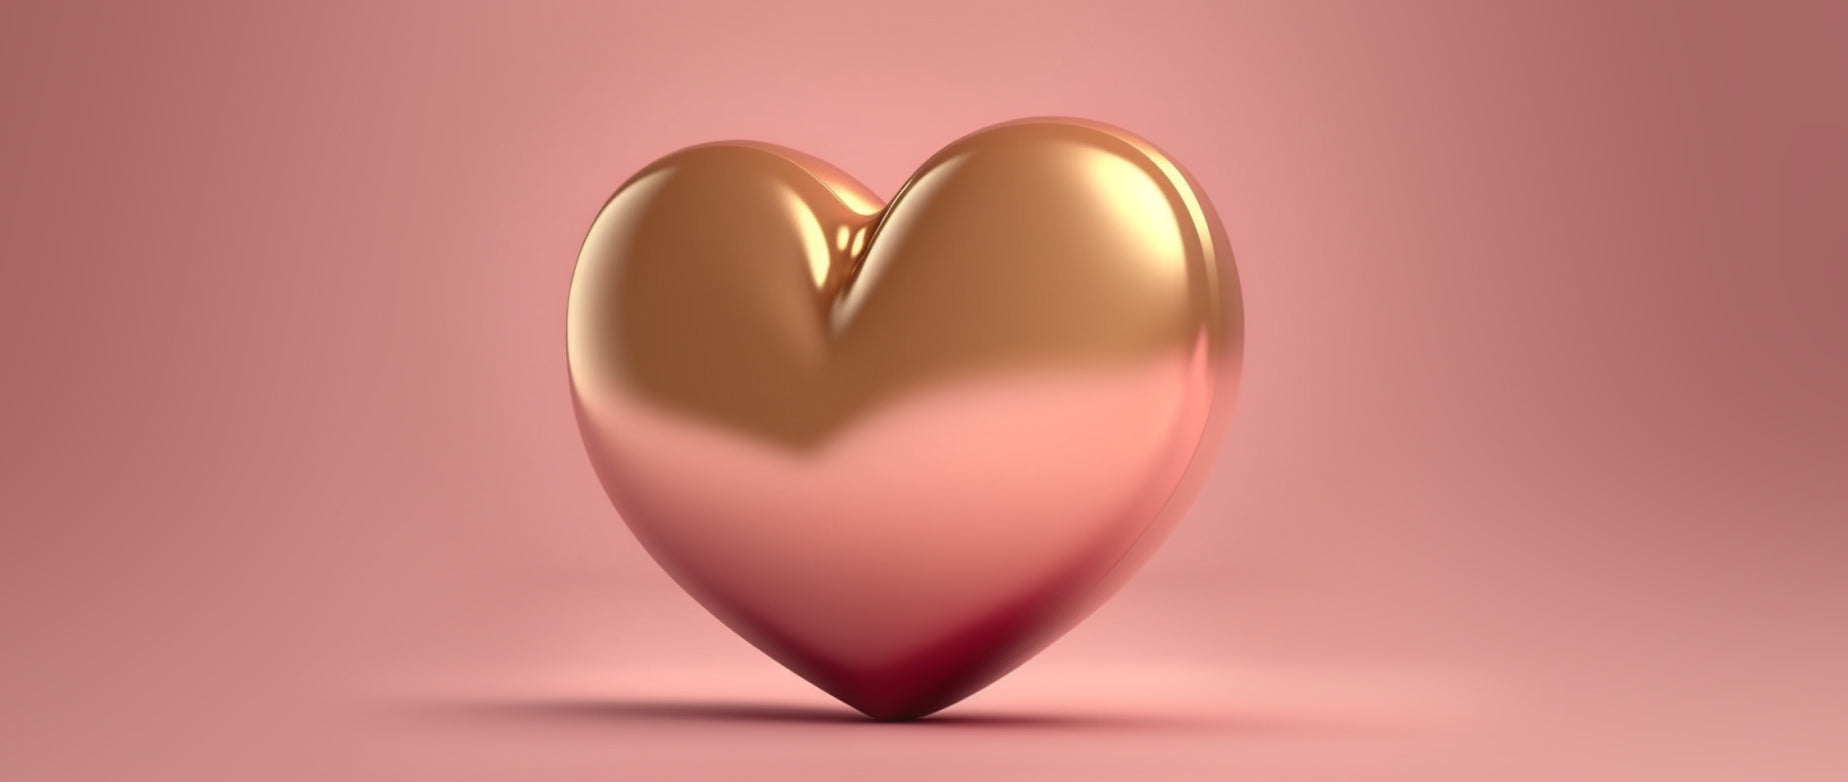 rose gold background with a metallic rose gold heart as abstract representation of brand identity